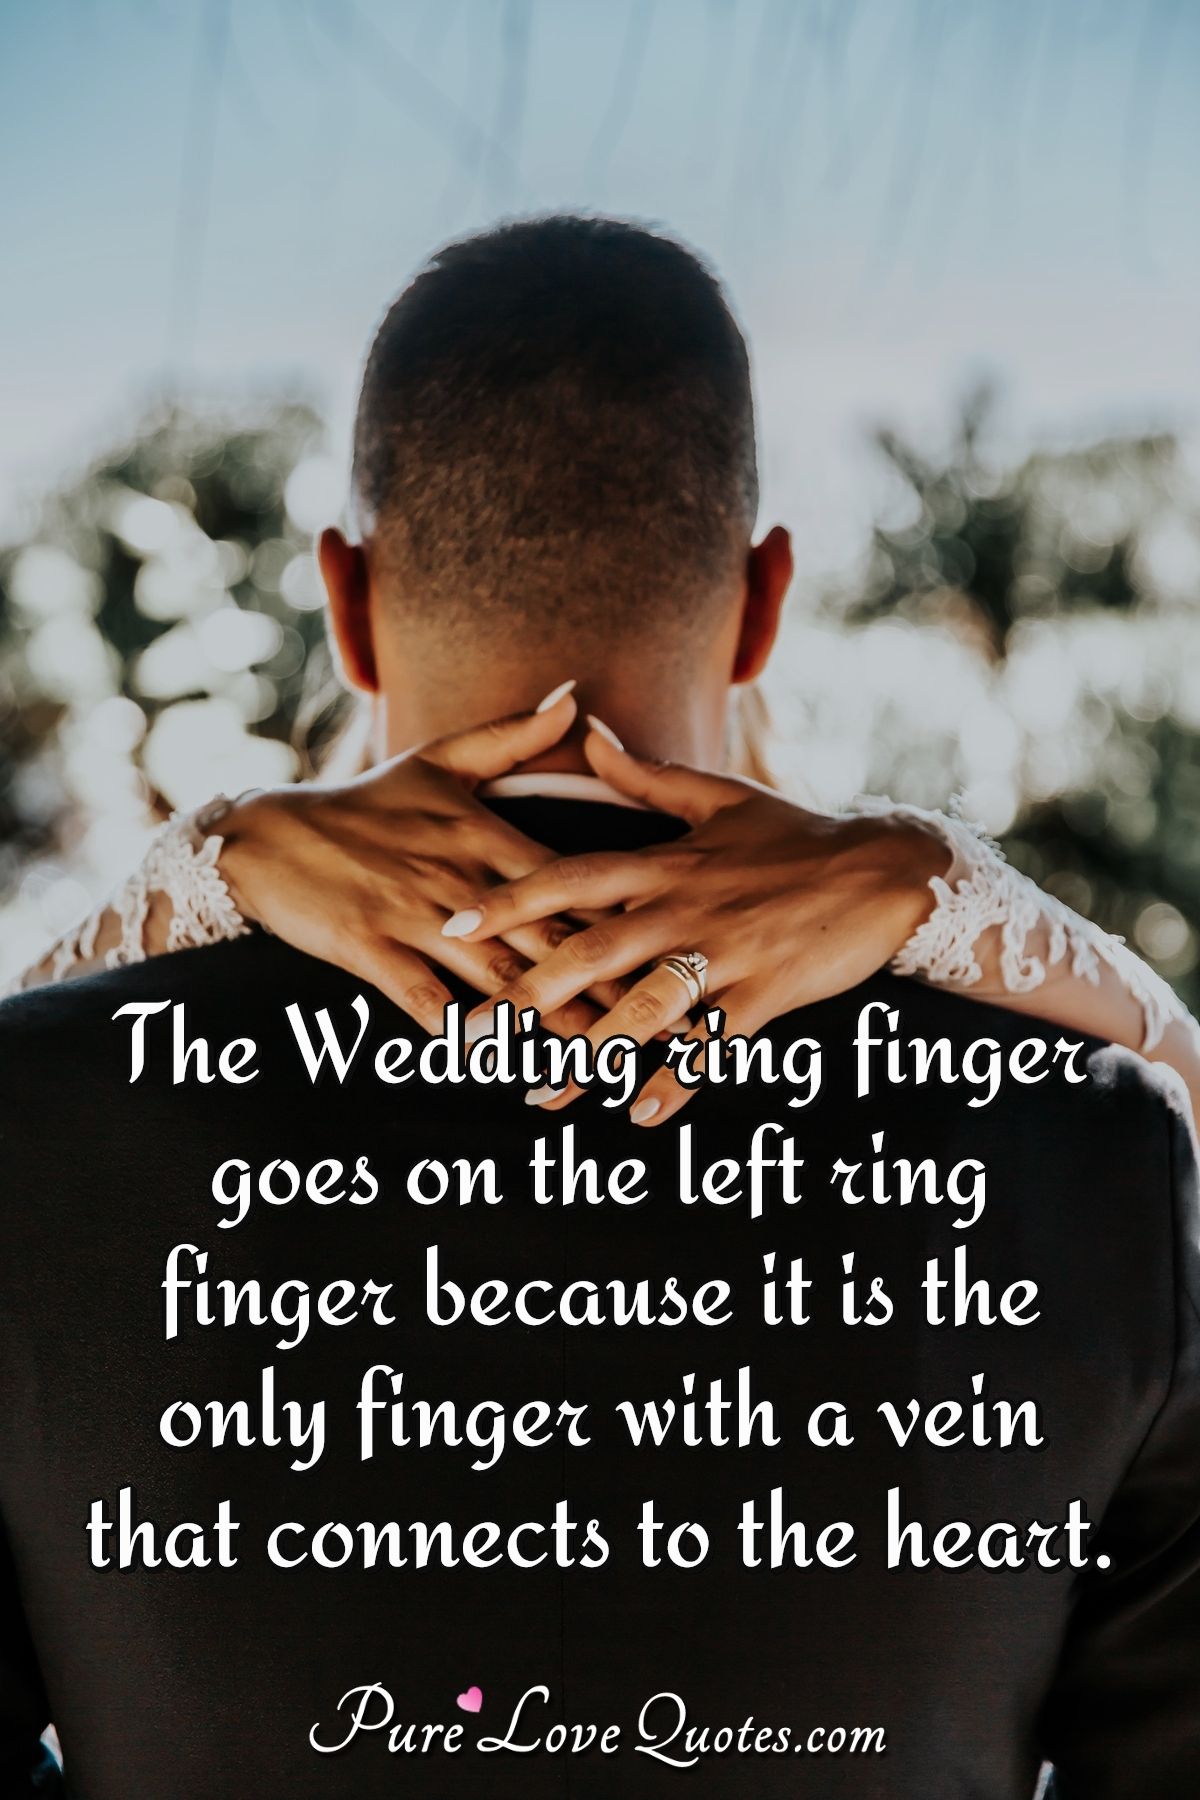 The wedding ring finger goes on the left ring finger because it is the only finger with a vein that connects to the heart. - Anonymous